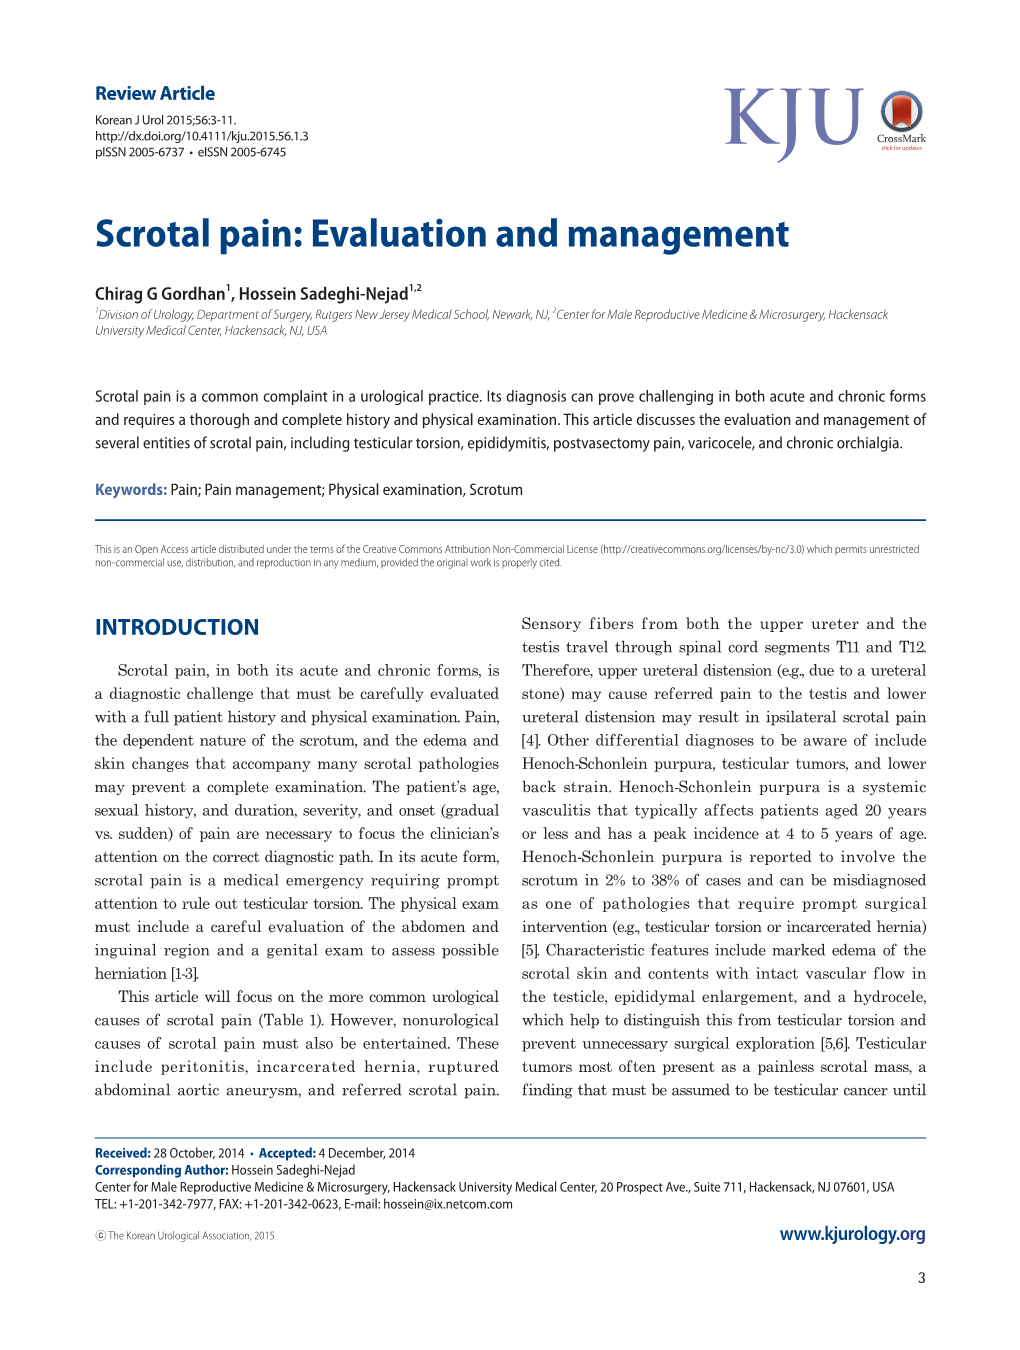 Scrotal Pain: Evaluation and Management